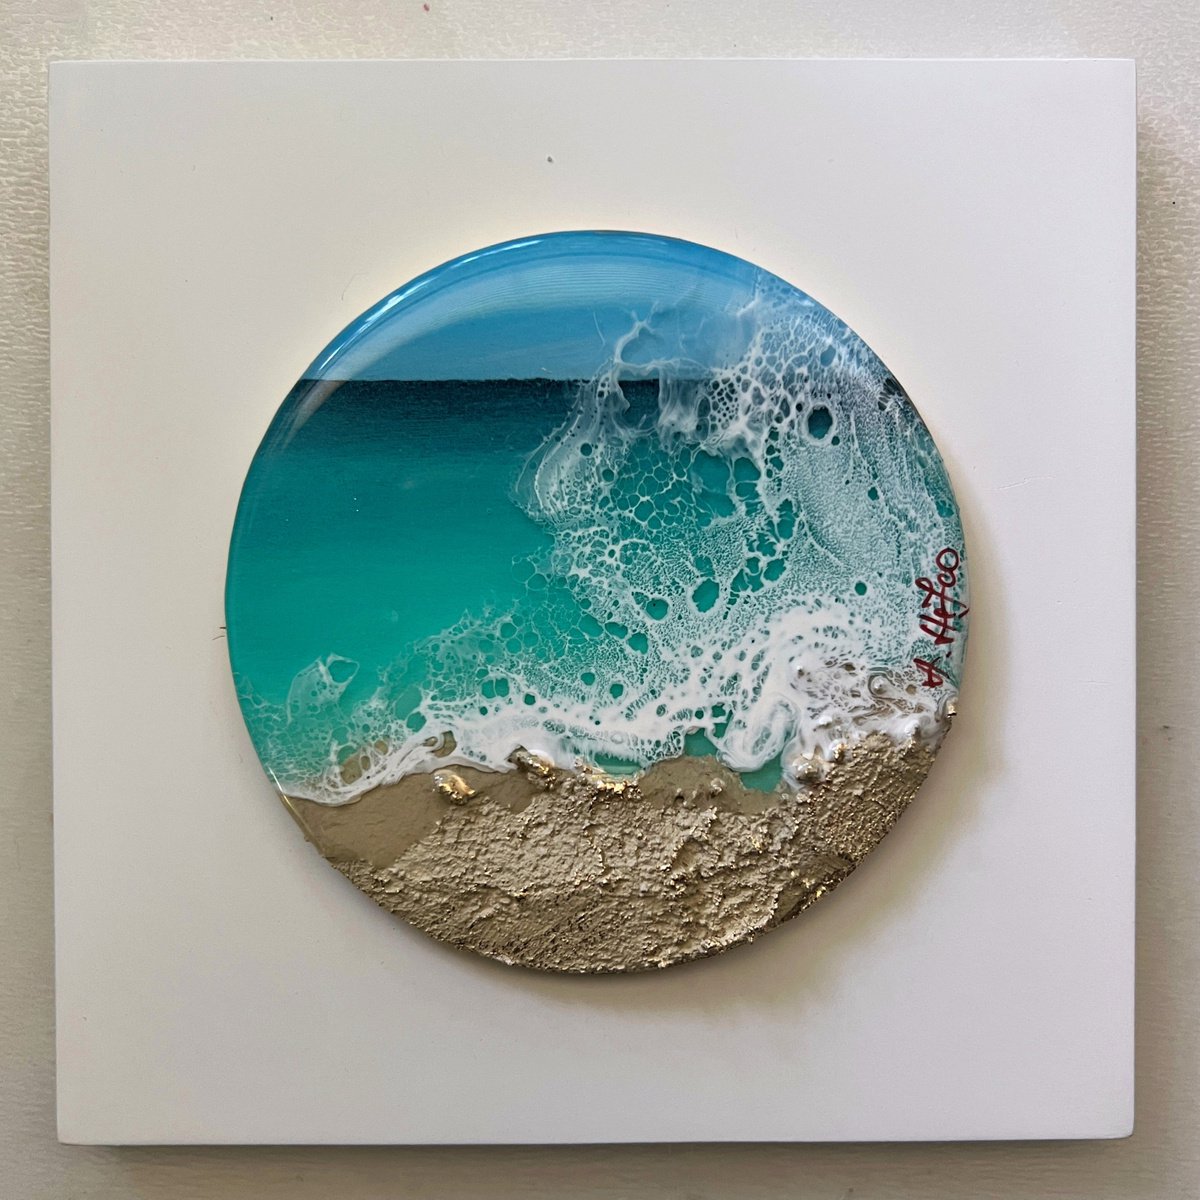 Little wave #4 - Miniature ocean painting by Ana Hefco